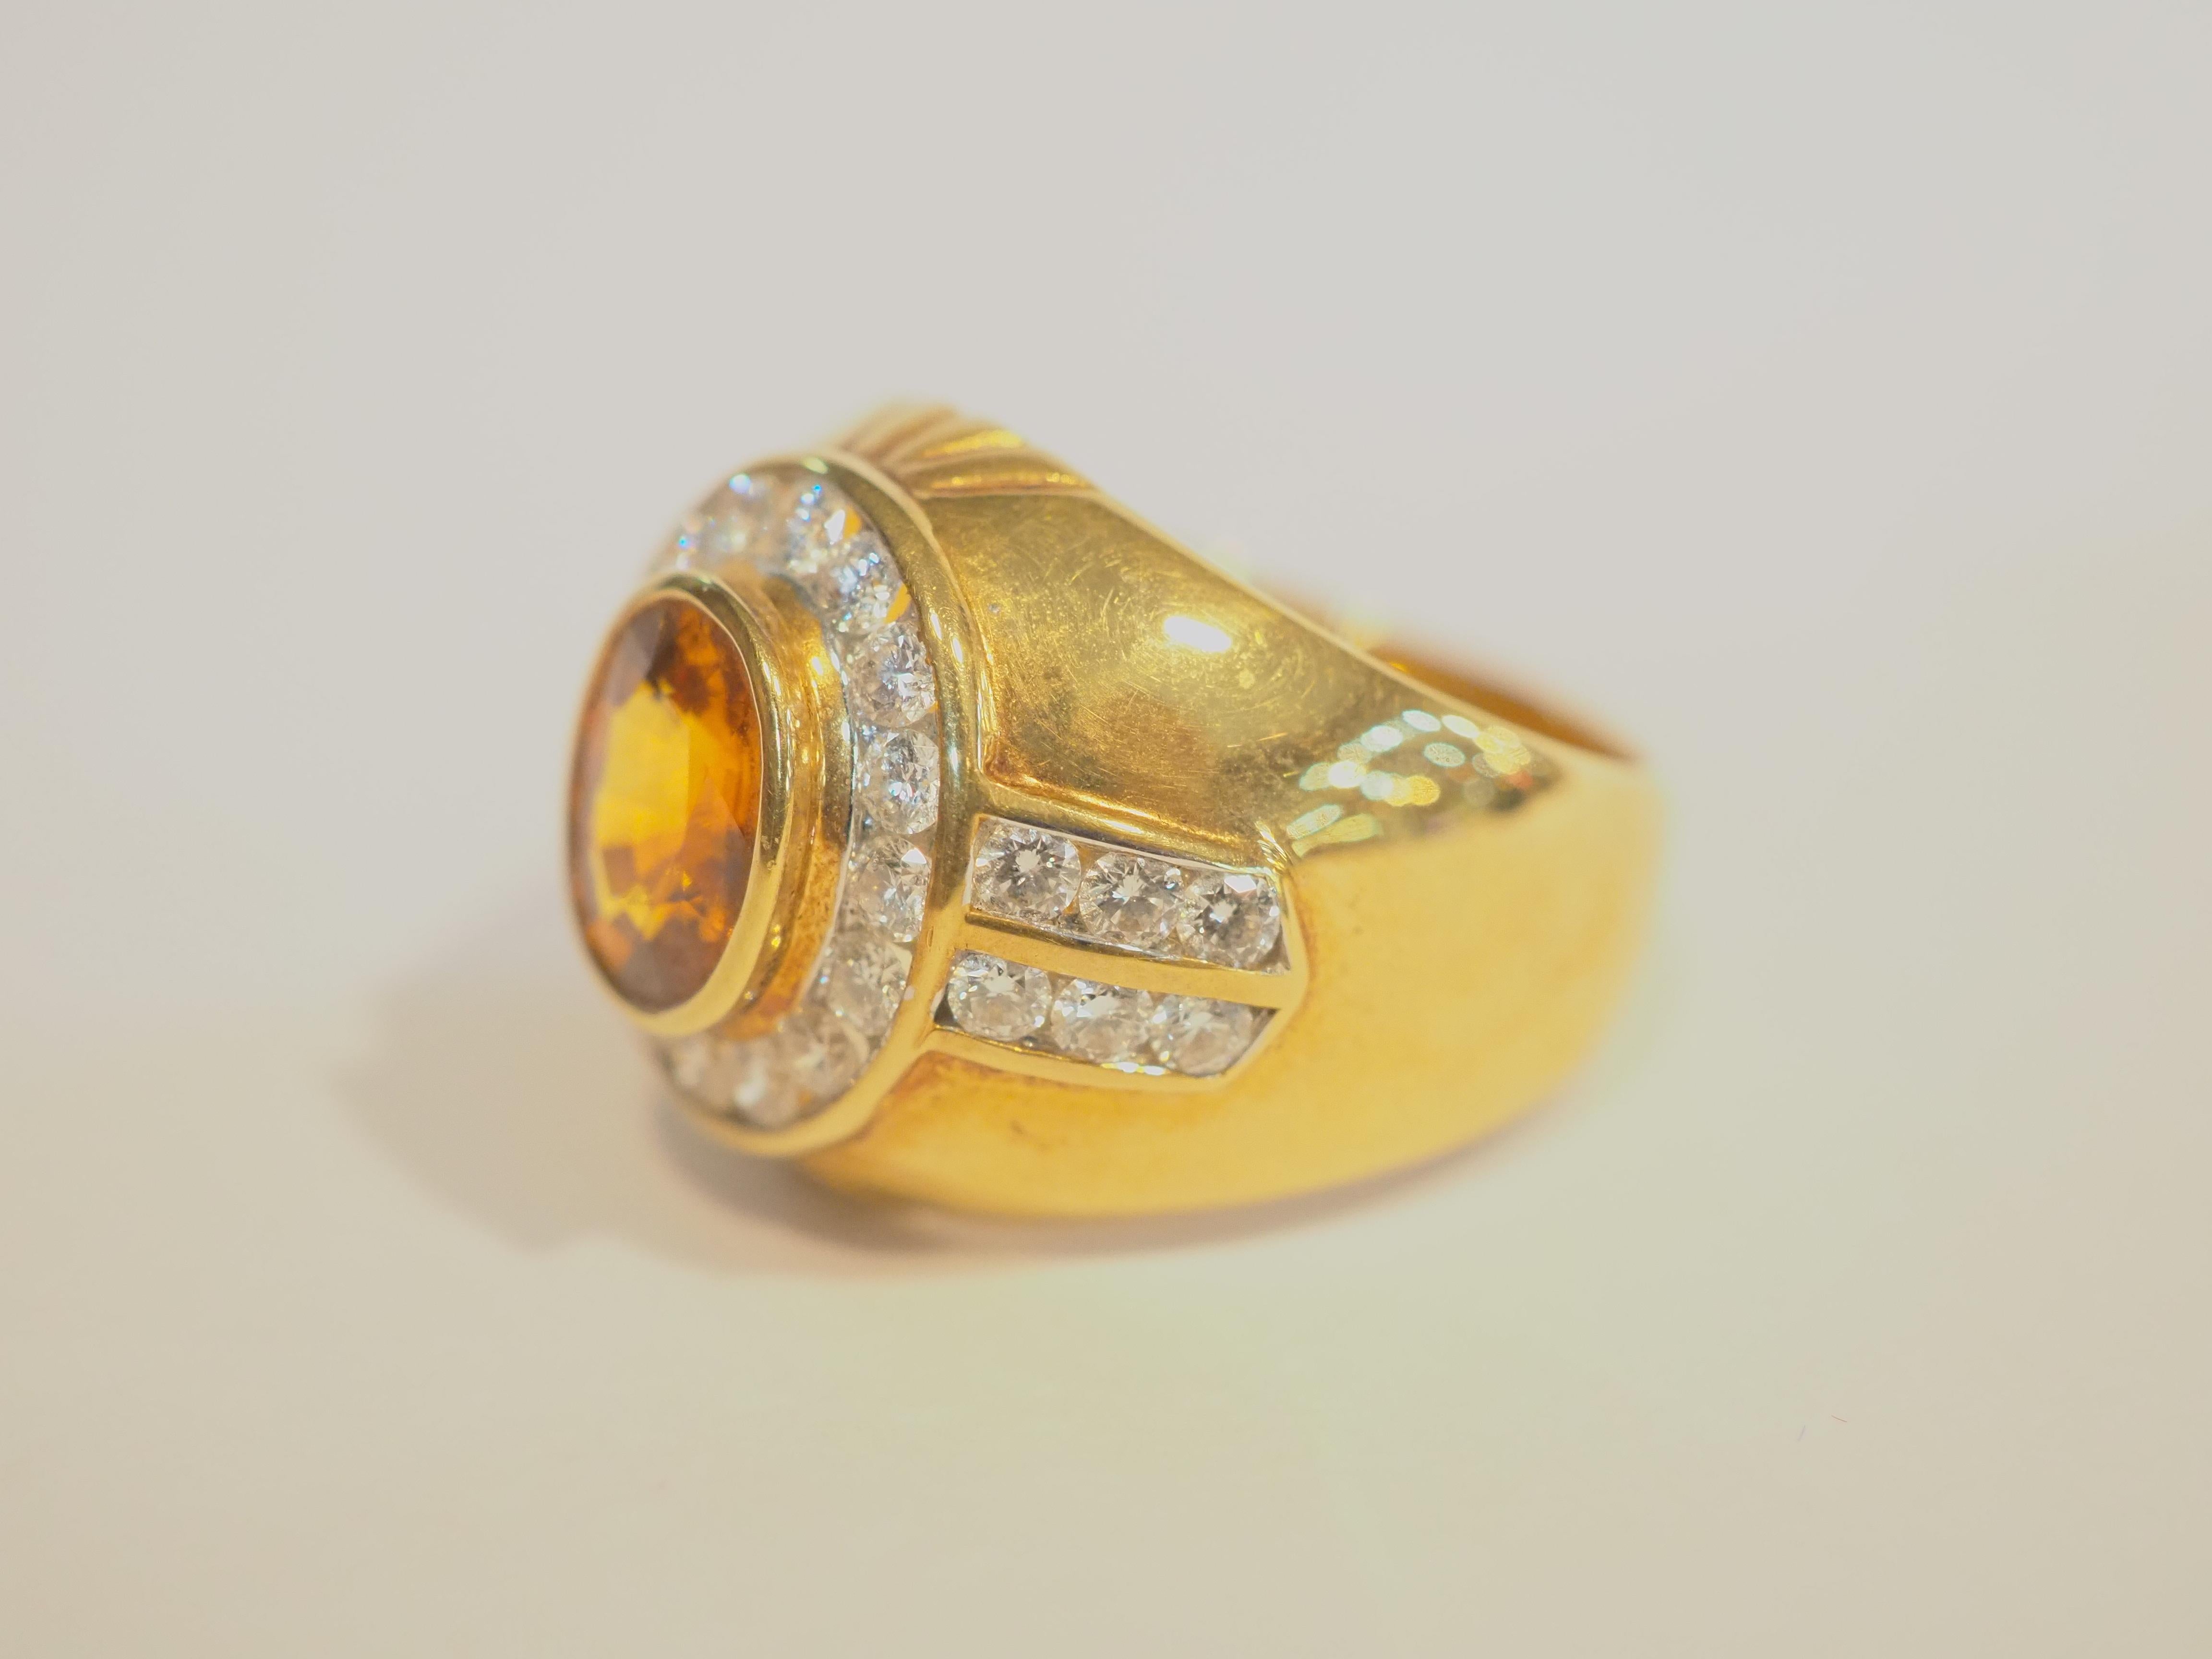  This fantastic cocktail piece is a beautiful 18K yellow gold fine Trombino dome ring for man. It features an oval orangish yellow sapphire as the main gemstone. The color is very saturated, and the surface is very clear. In Thai, this color is